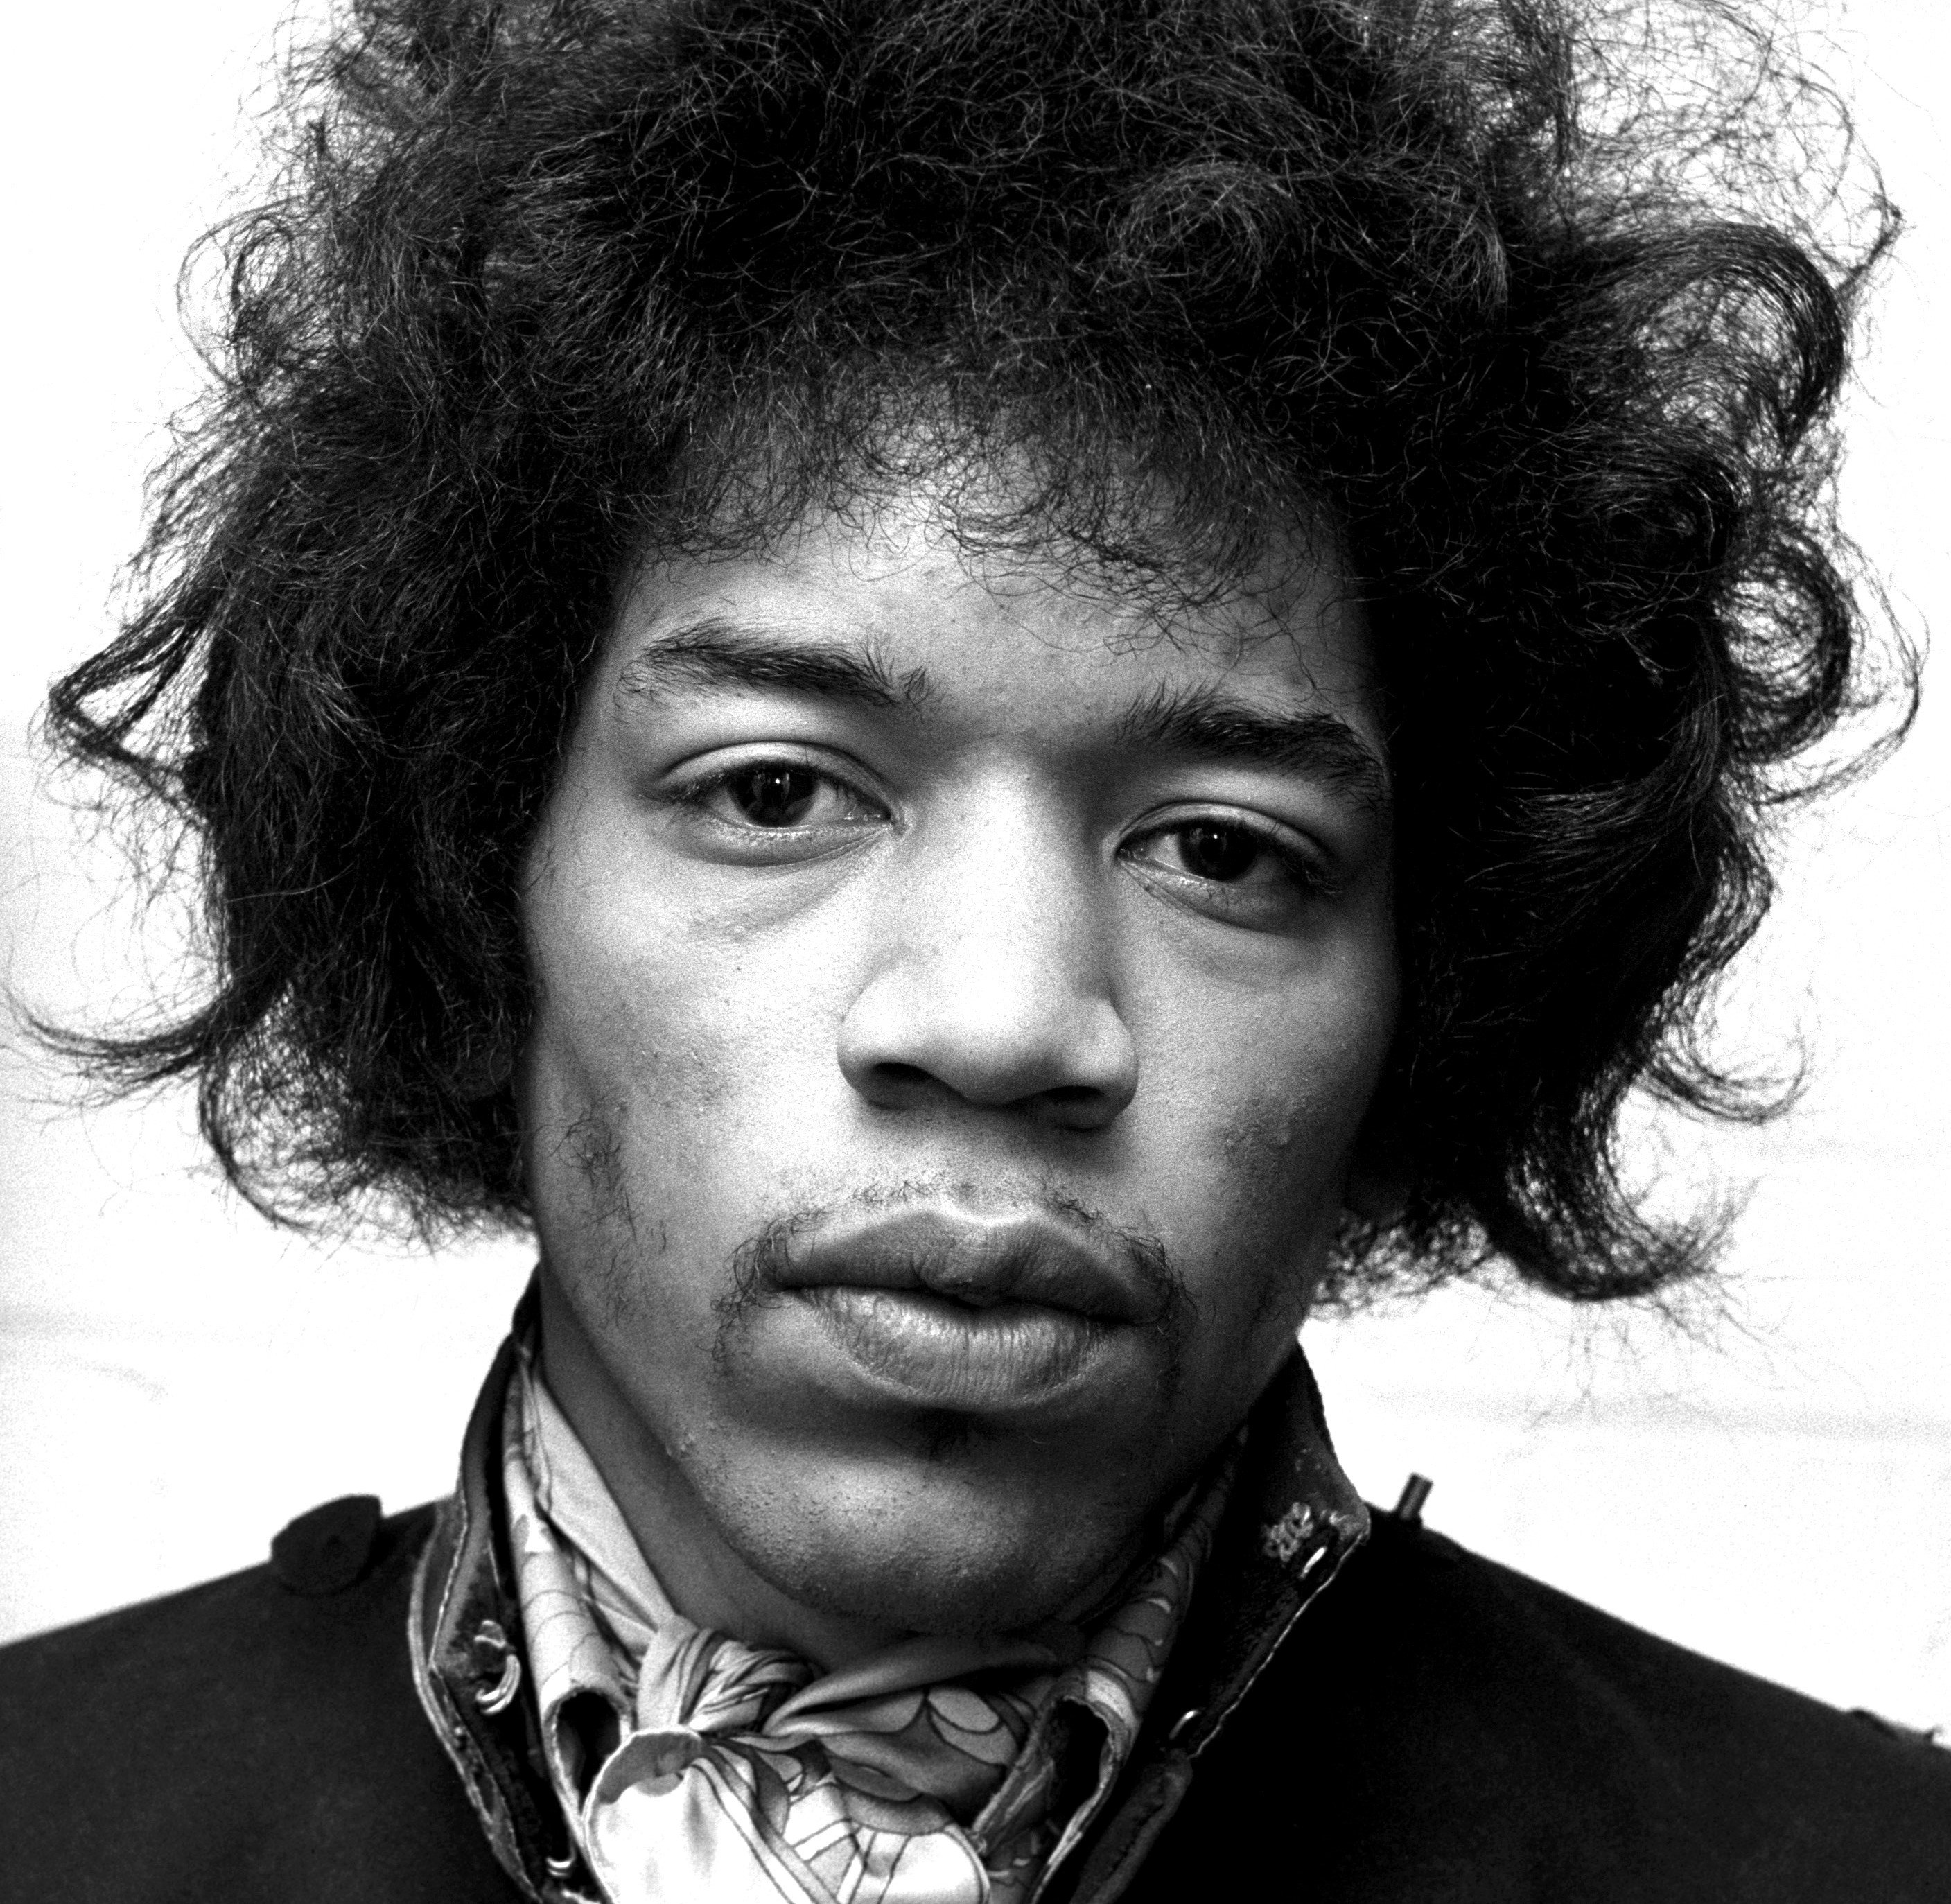 Jimi Hendrix Shocked The Monkees’ Songwriter While Performing ‘Foxy Lady’ and ‘Purple Haze’